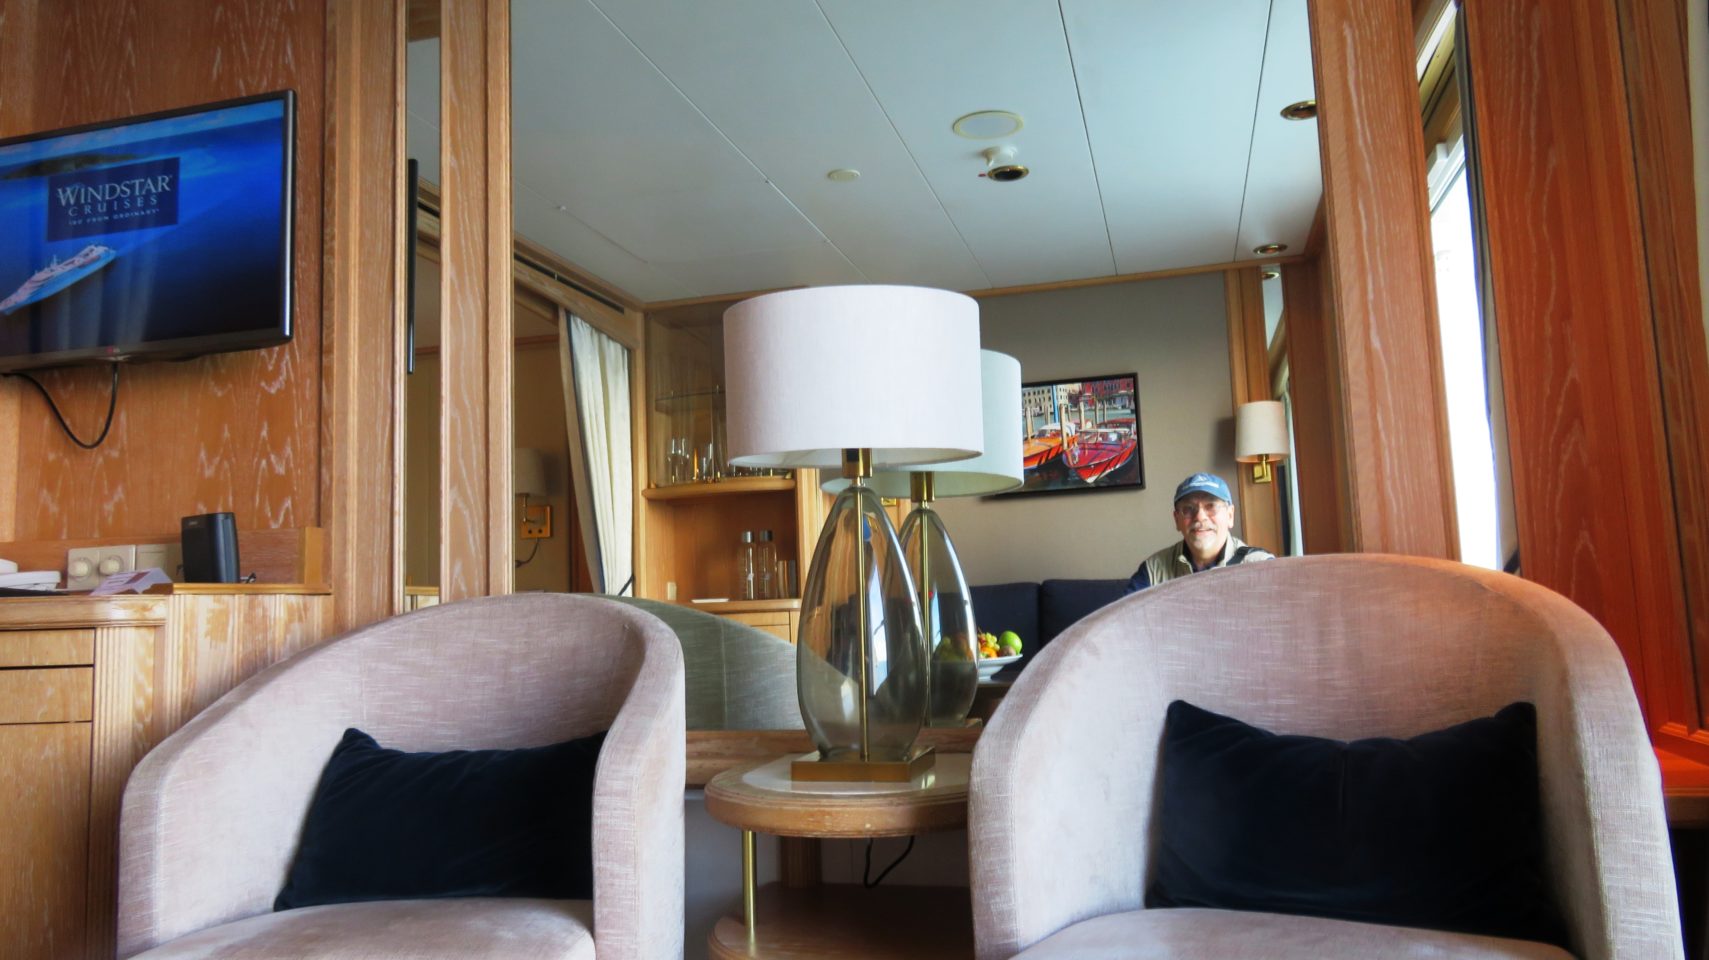 Windstar Cruises ~ Denis enjoying the comfort of the living area of our ideal cabin